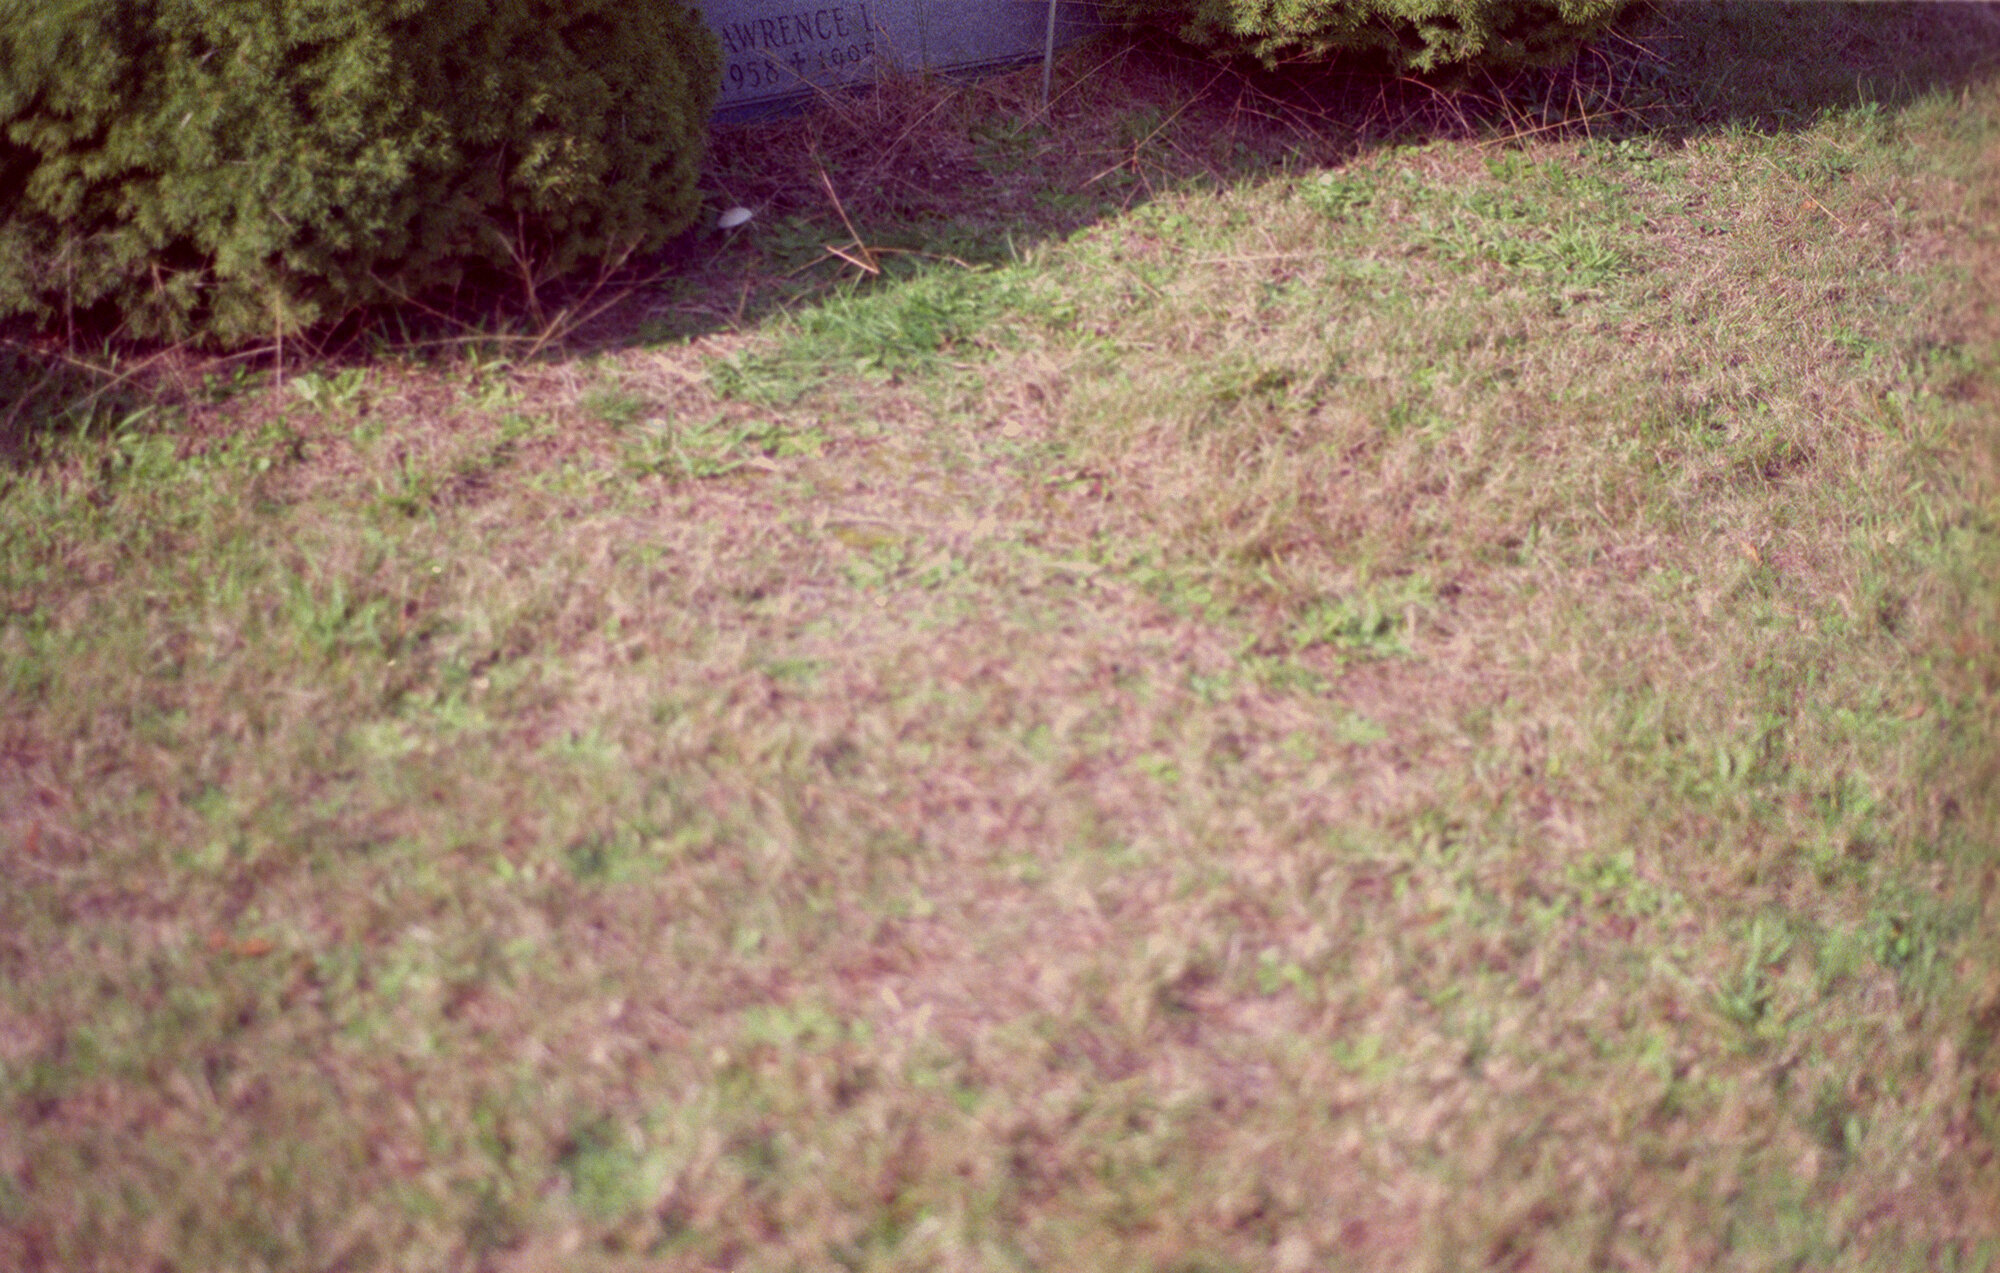 the empty plot next to my dad's grave